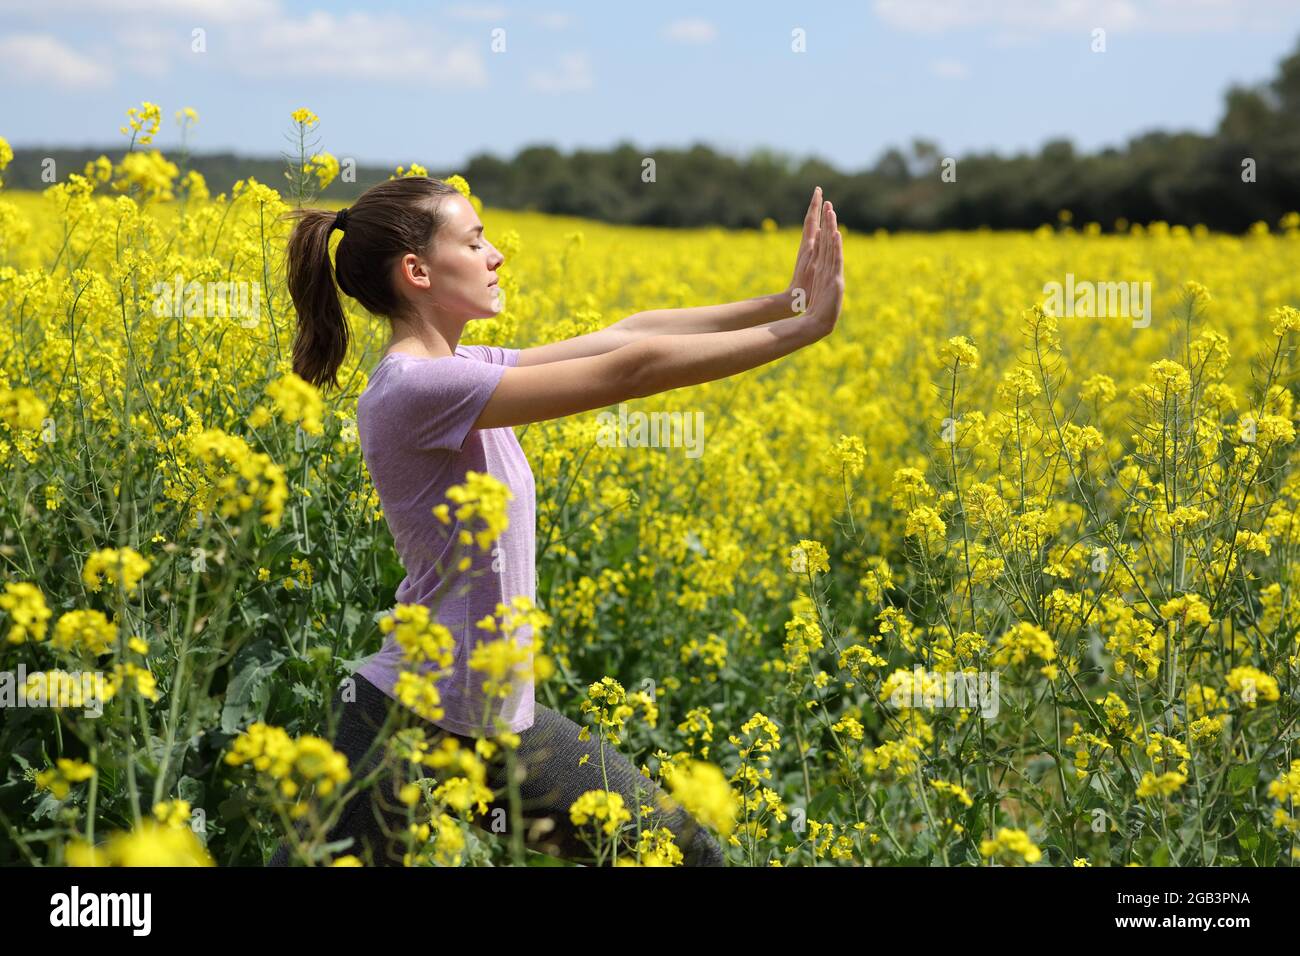 Profile of a woman doing tai chi exercise standing in a yellow field Stock Photo